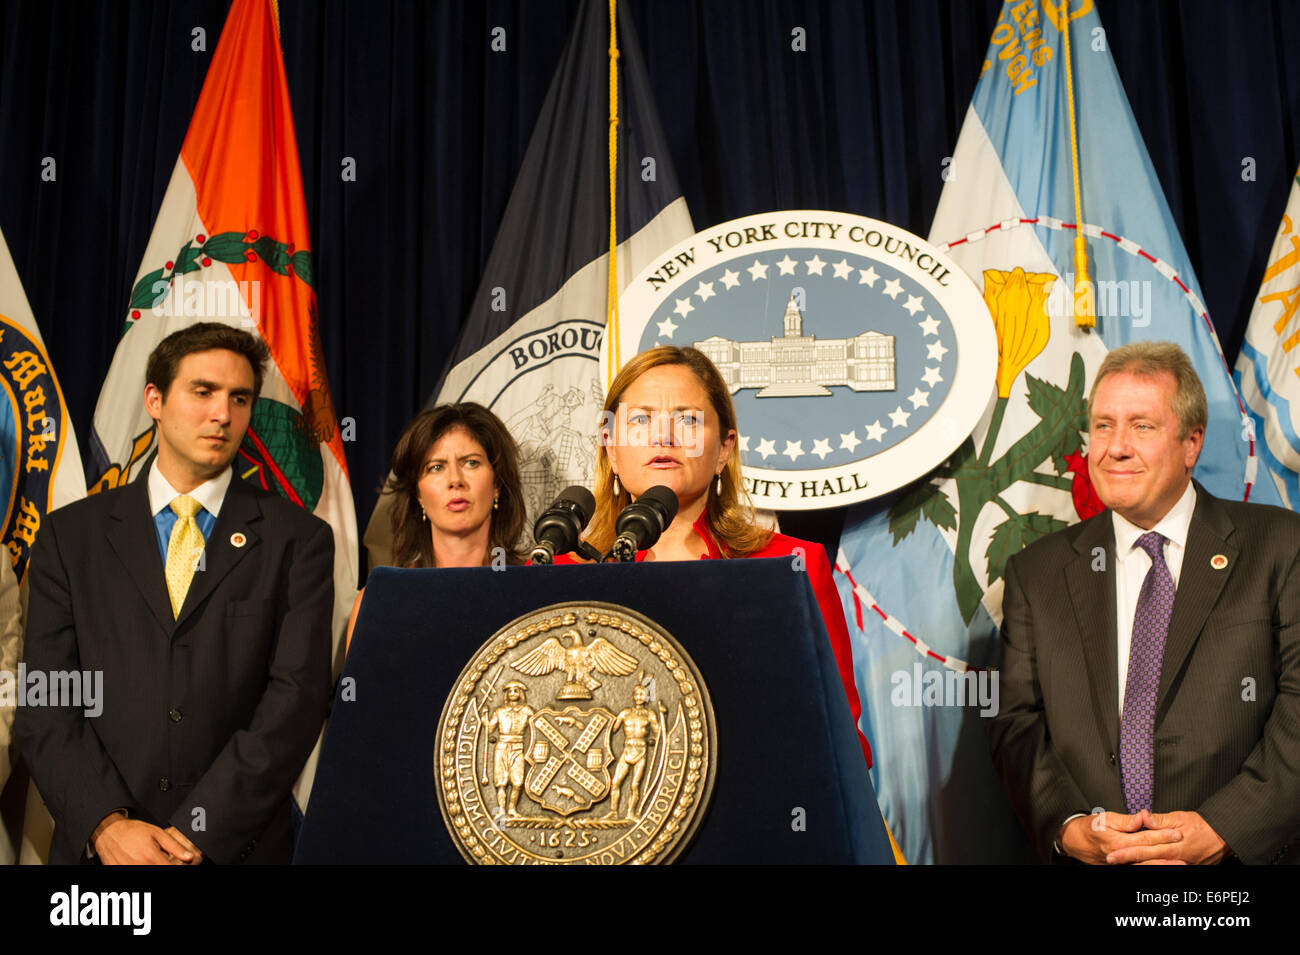 NY City City Council Speaker Melissa Mark-Viverto accompanied by members of the City Council, speaks at a press conference Stock Photo